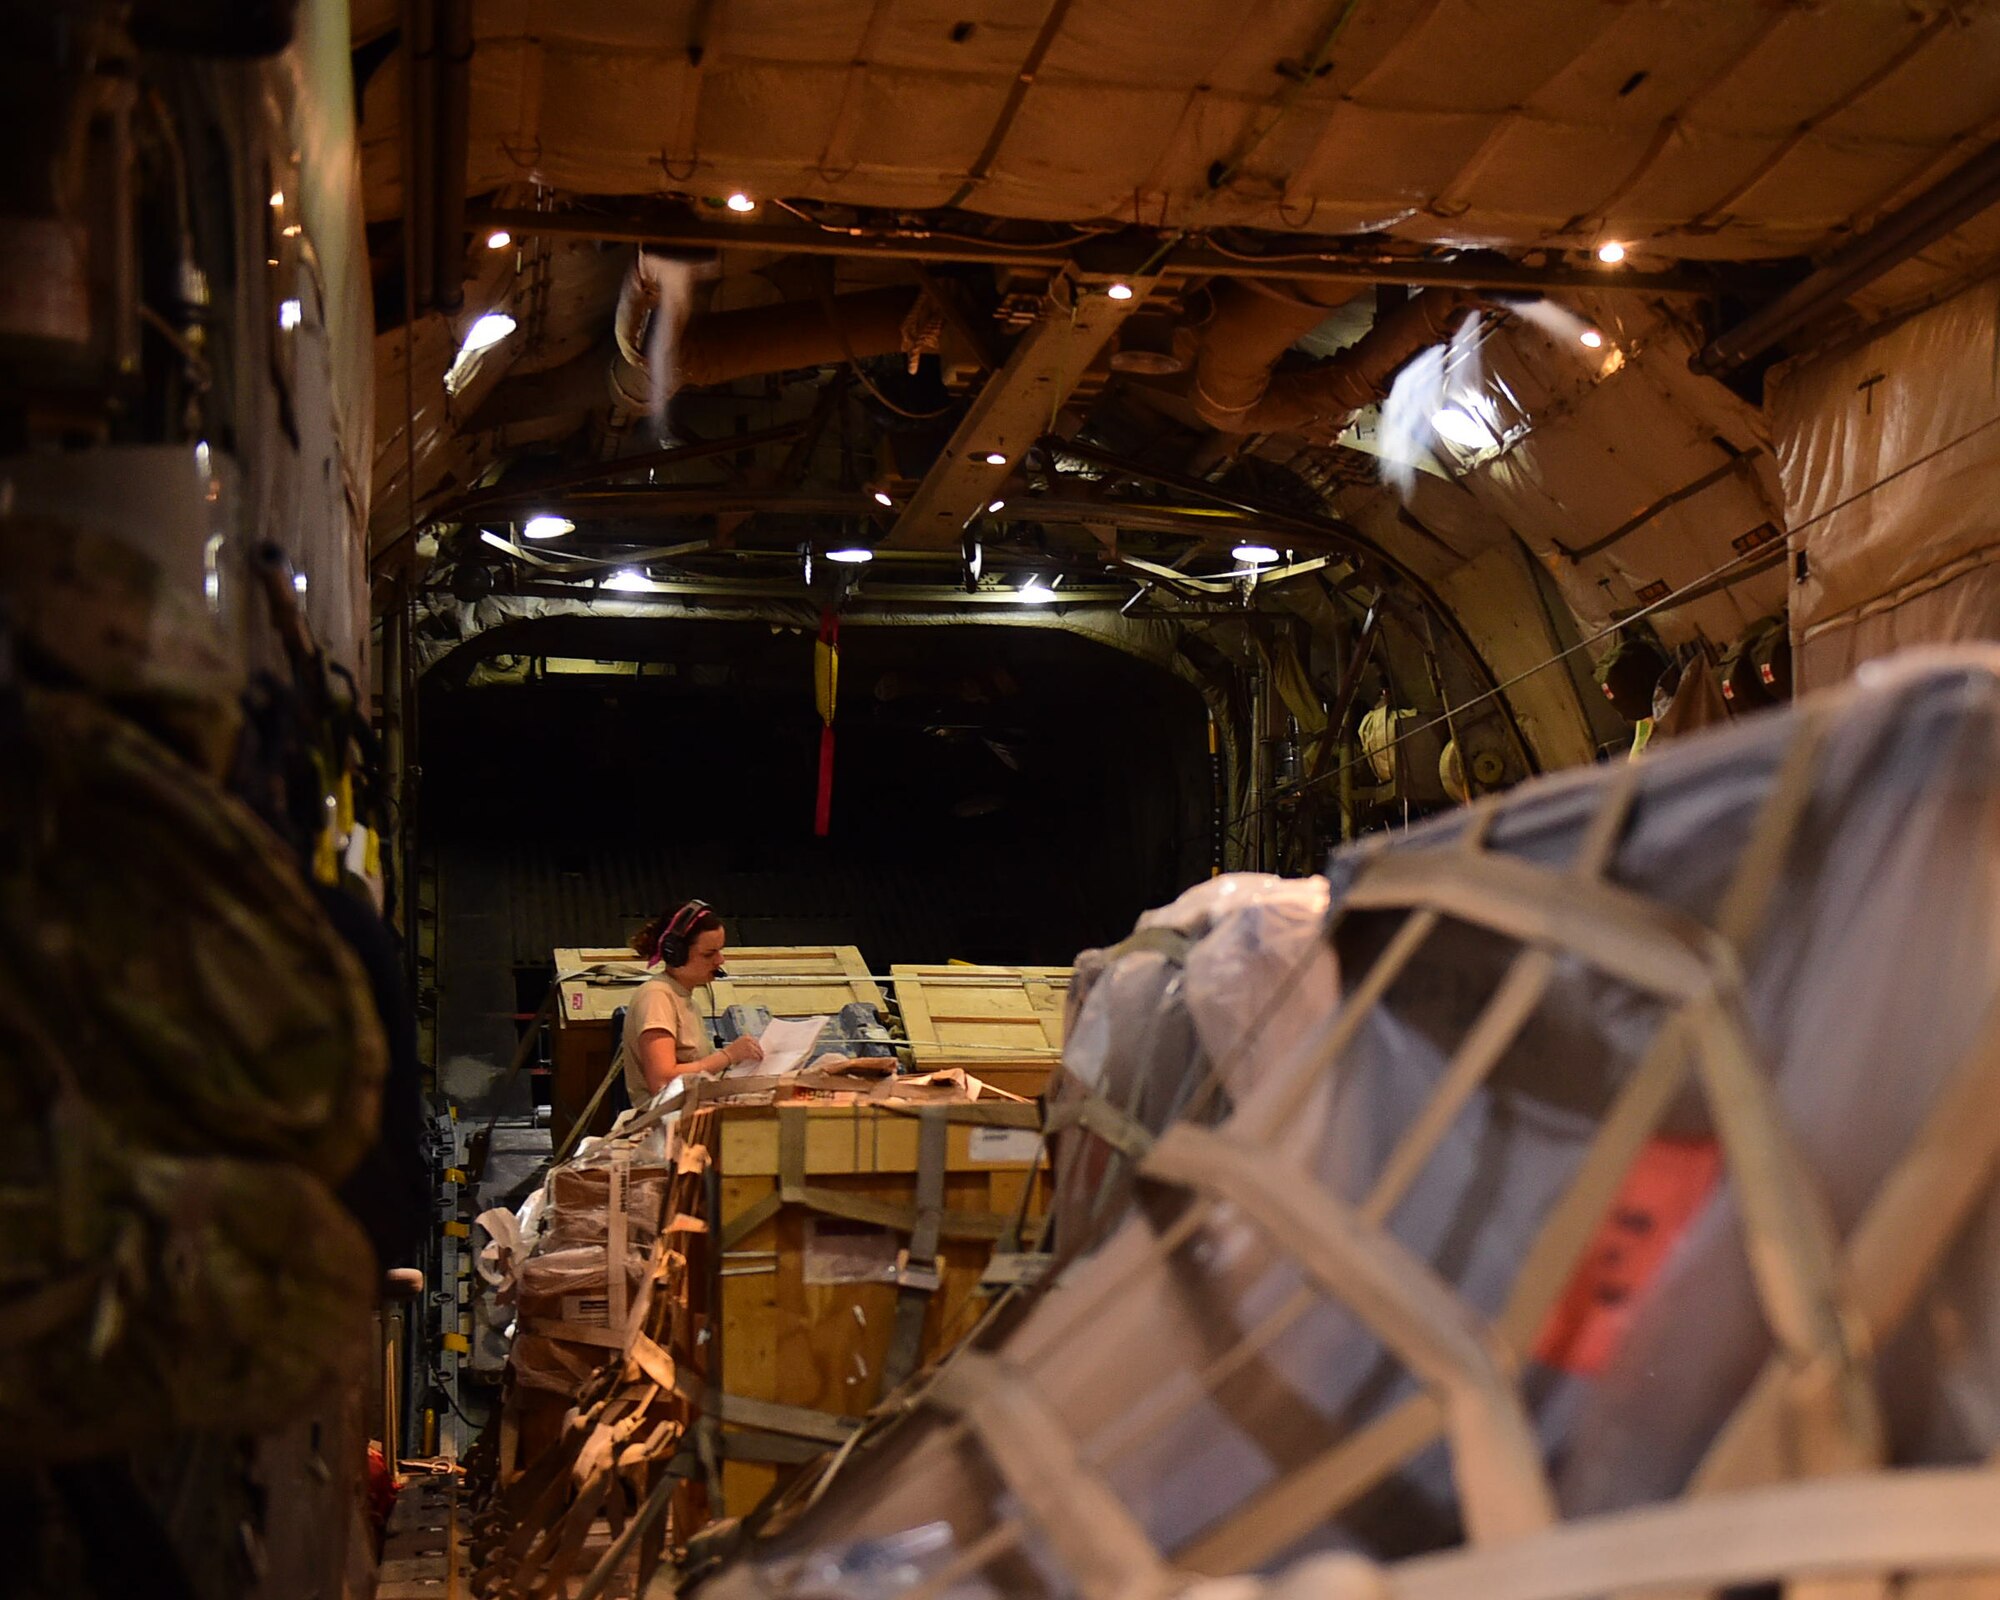 Senior Airman Erin Stewart, 737th Expeditionary Airlift Squadron loadmaster, reviews cargo paperwork onboard a C-130H Hercules at an undisclosed location in Southwest Asia, Oct. 27, 2015. Stewart and nearly one hundred members from the 192nd Airlift Squadron based out of Reno, Nevada are deployed in support of Operation INHERENT RESOLVE. (U.S. Air Force photo by Staff Sgt. Jerilyn Quintanilla)